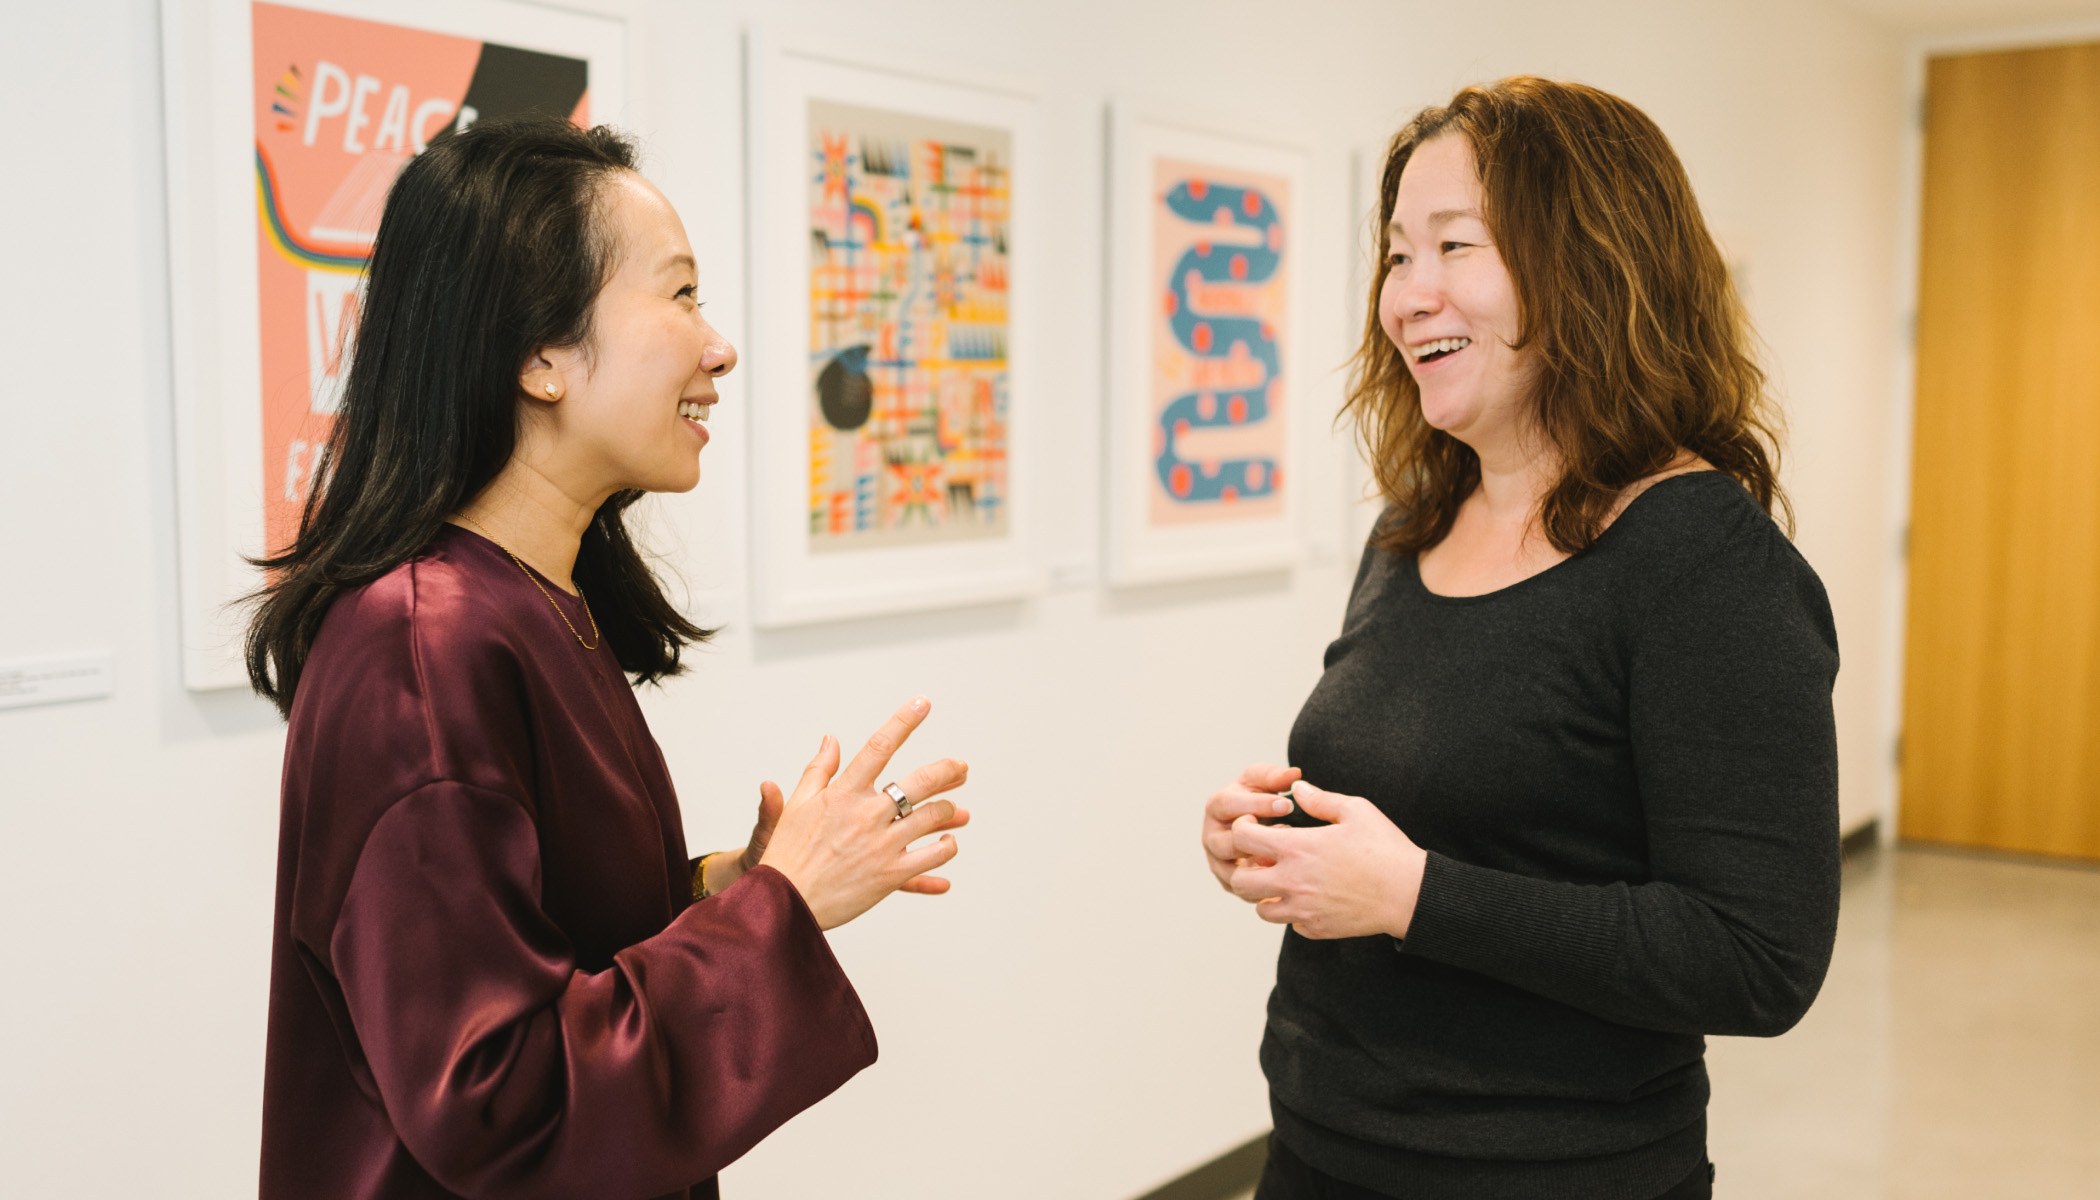 Sandra Liu Huang, CZI’s head of education stands in the hallway at CZI headquarters and faces Monica Milligan, executive director of Gradient Learning. Both are smiling as they speak.